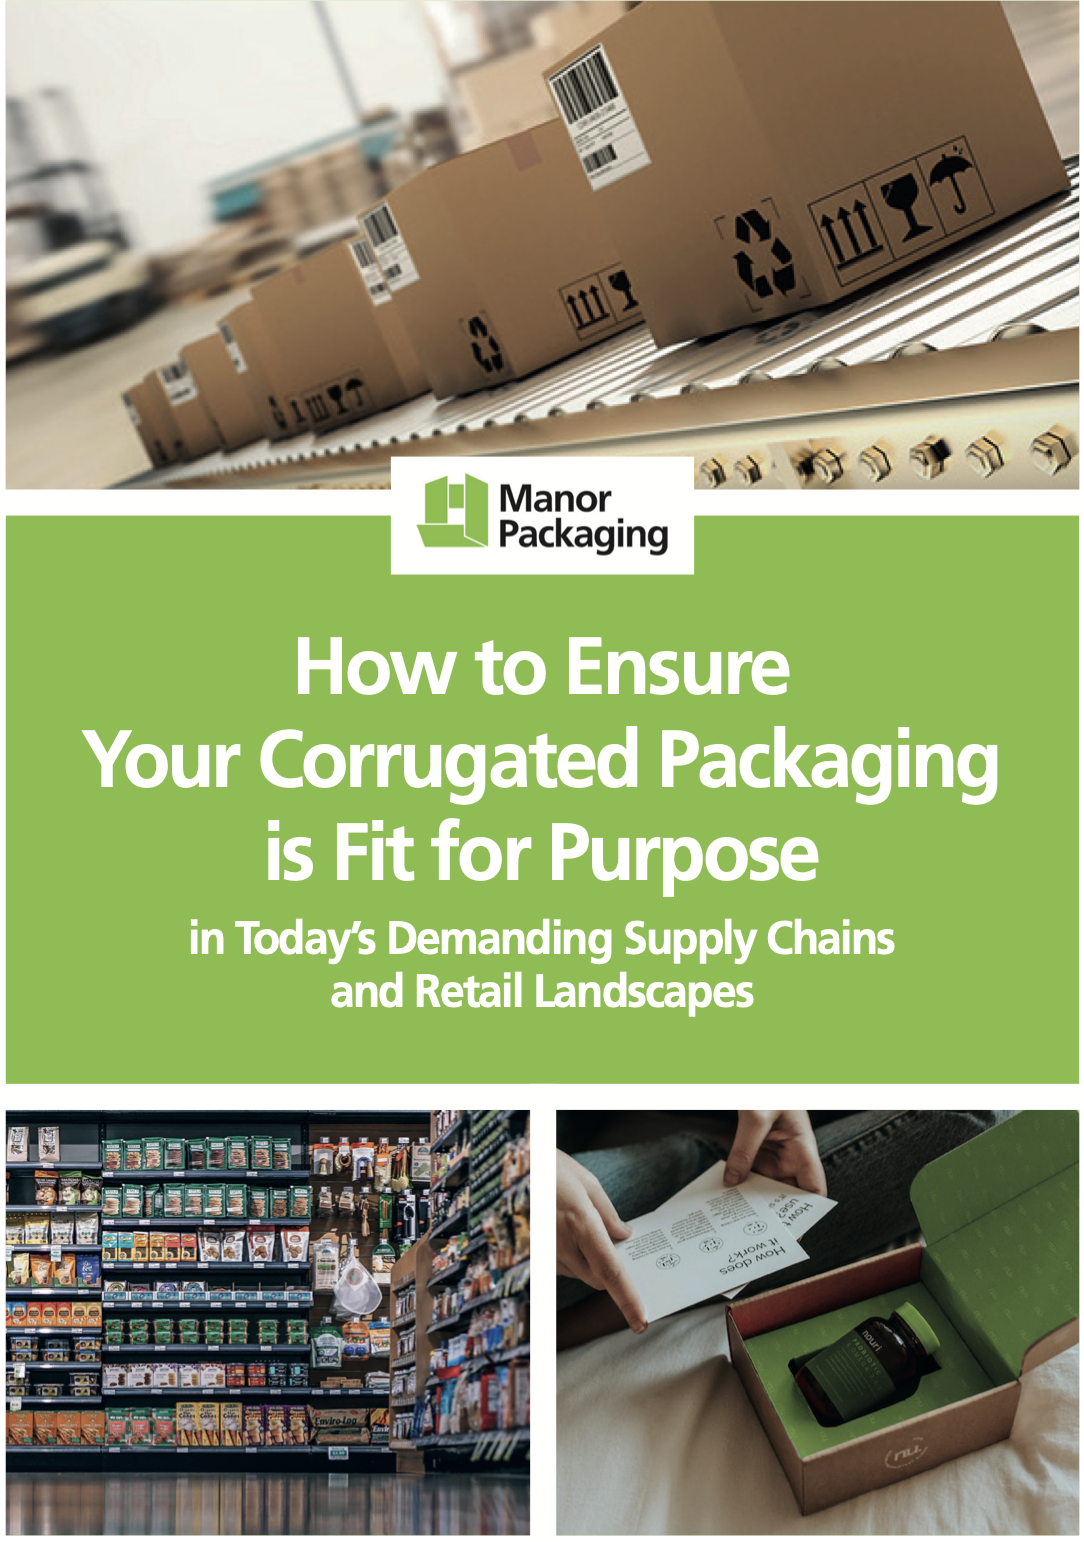 A guide entitled How to Ensure Your Corrugated Packaging is Fit For Purpose